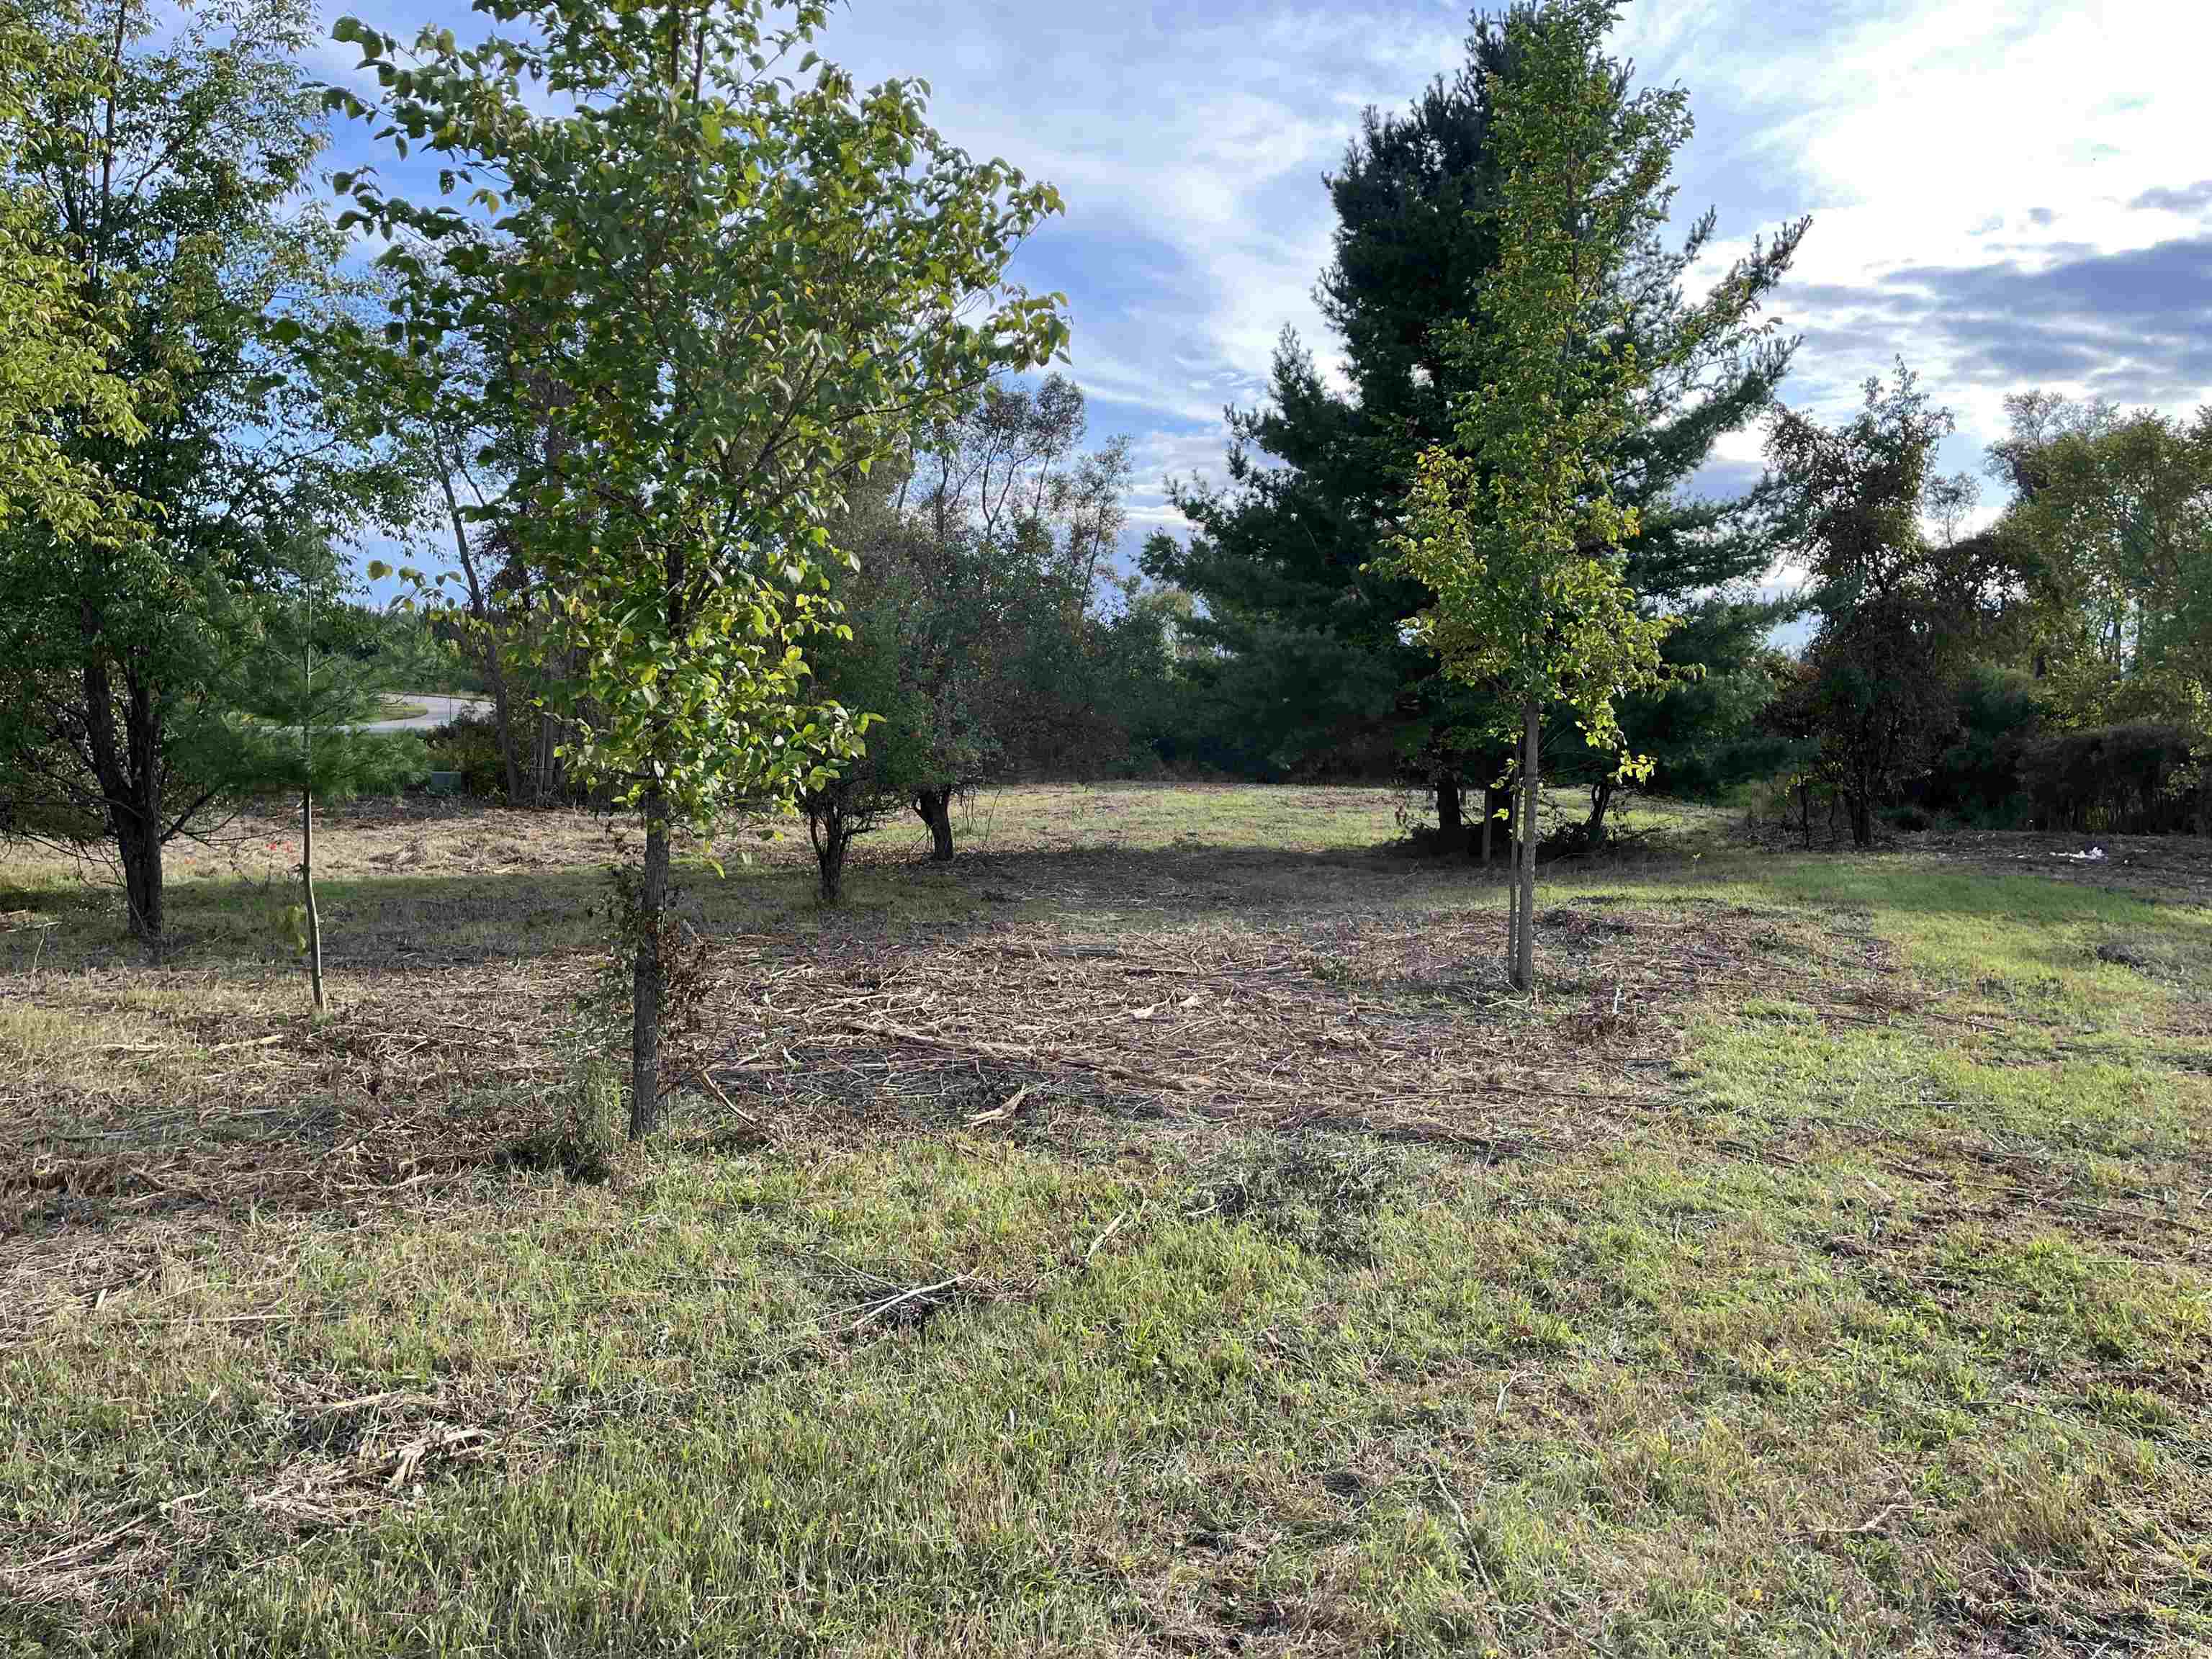 1.72 Acres to spread out on.  5 lots Overlooking rural area and beautiful landscape.   4 Contiguous lots and includes lot 84 equaling 1.72 acres ready for you to build or camp and giving you the whole west side of street and surrounded by commons for privacy.  Property has been clear (see photos) and there is a driveway and electric brought into lot, but will need to be brought up to code through Consumers.   Just a short walk to Kenworth Beach Club for rental docks or boat ramp.  FYI:  You will need to get a permit and connect to sewer for camping. Hamilton Realm is a great biking and walking location.    Ownership provides access to an 18 hole golf course , restaurant/pub, fitness center, indoor heated pool, tennis/bocce ball courts, chalet/sledding hill, walking (nature) trails, activity bldg, storage area, 2 all sports lakes, Lk Lancer/Lancelot, 15 beach clubs (5 with beach/bath house). Sugar Springs offer year around activities and events to enjoy.   2-1/2 hours from Detroit.